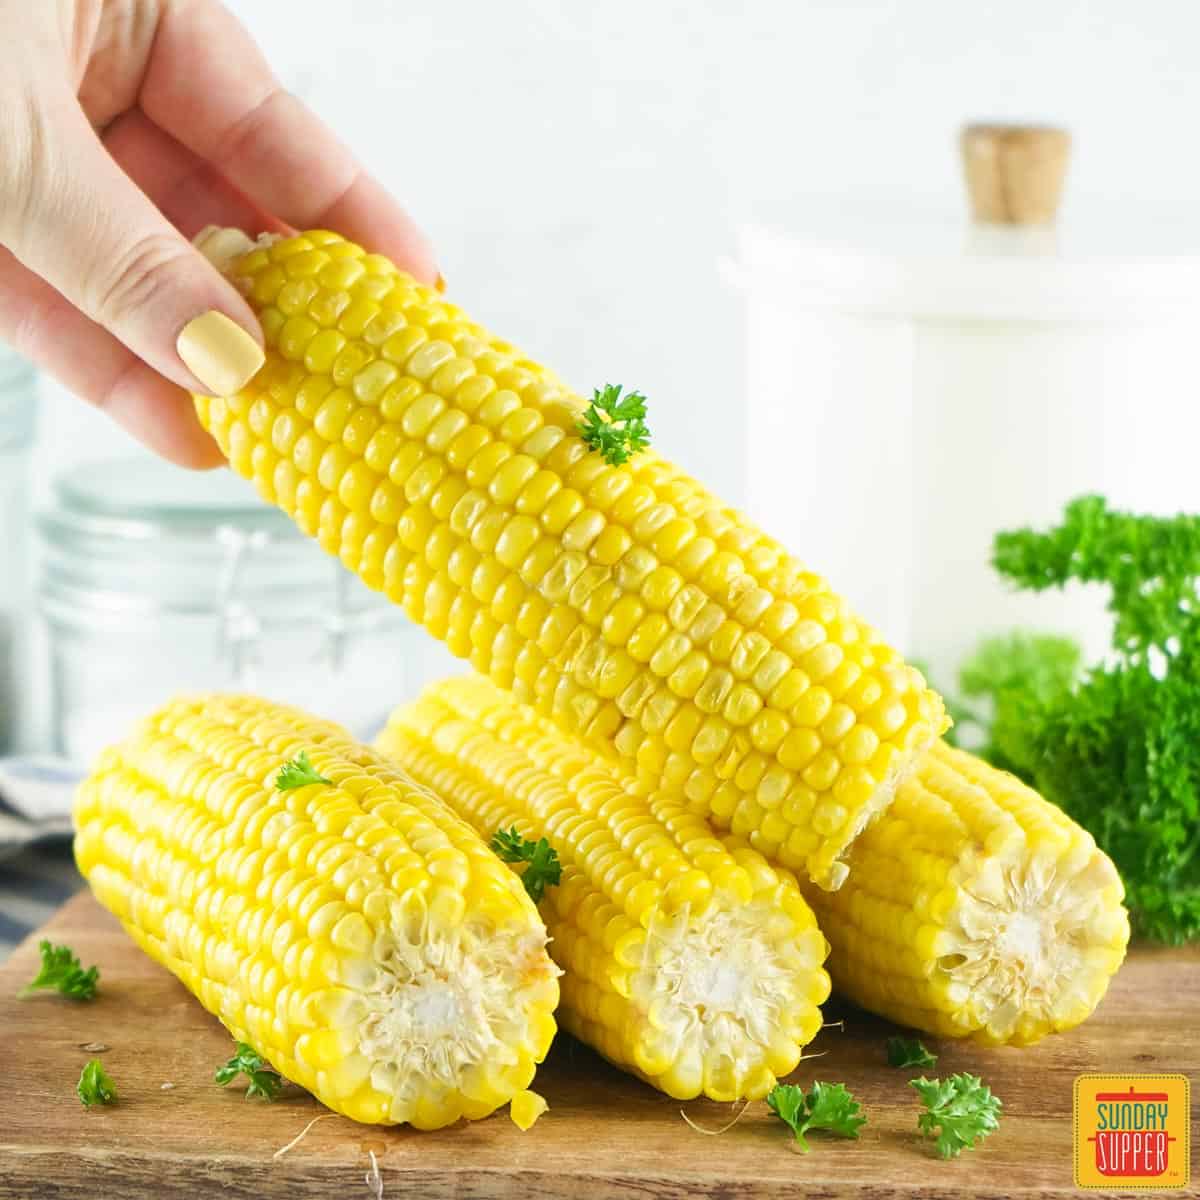 Picking up a cooked corn on the cob